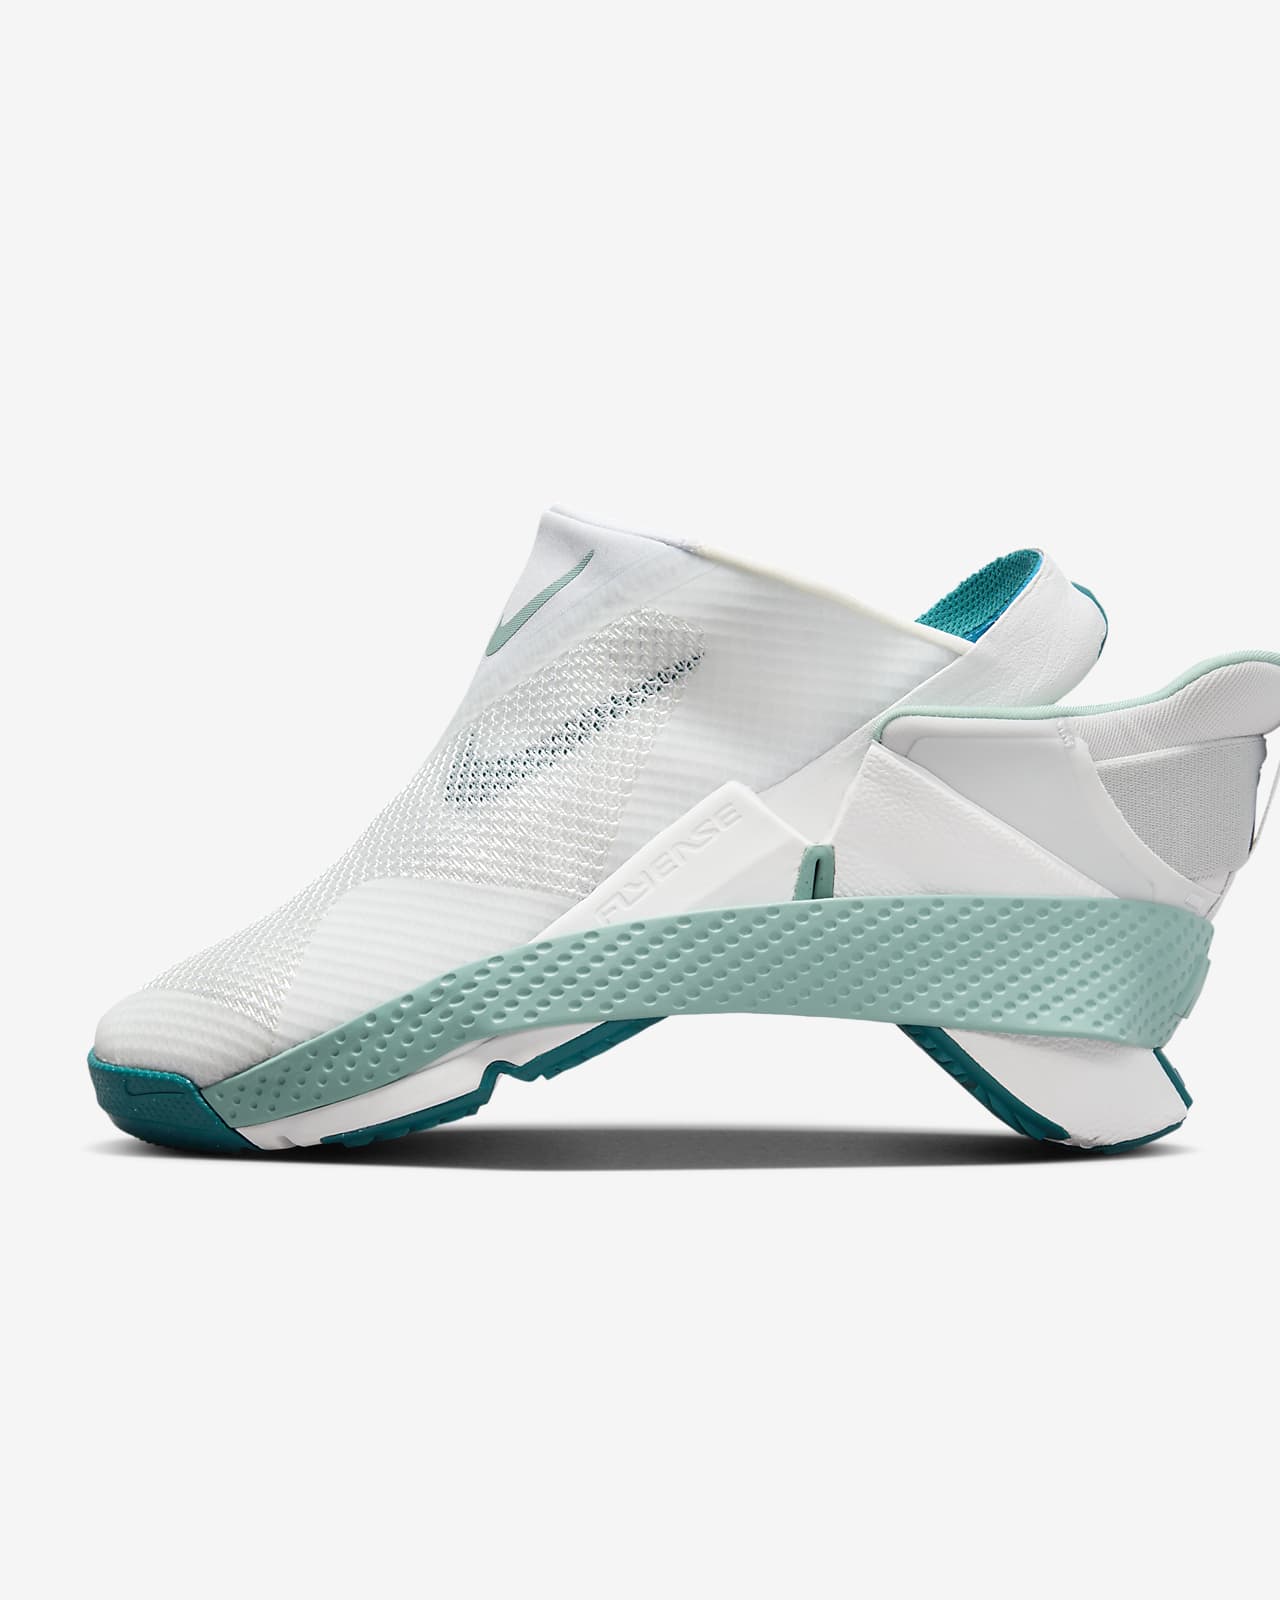 【 23㎝】Nike Go Flyease ナイキ ゴー フライイーズ